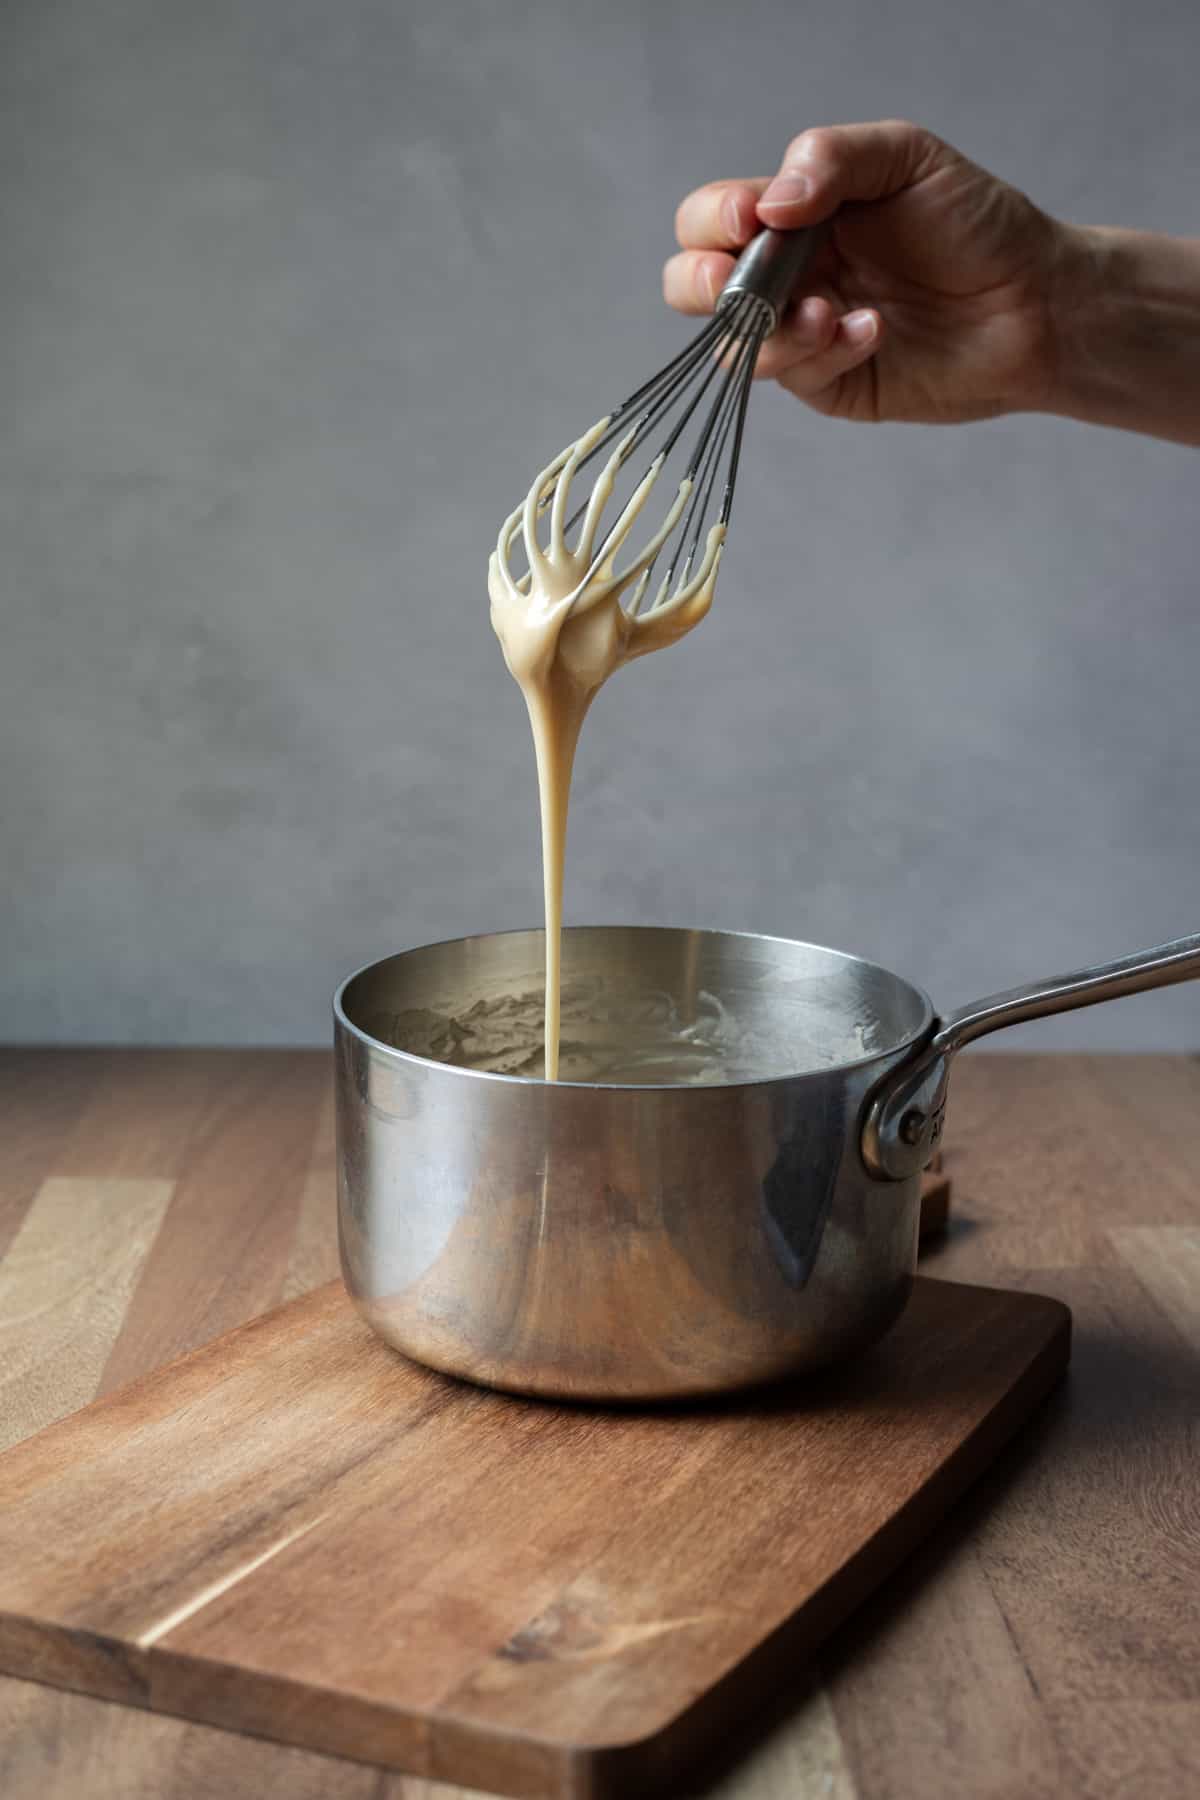 holding a whisk above a pot with thick condensed milk dripping down.